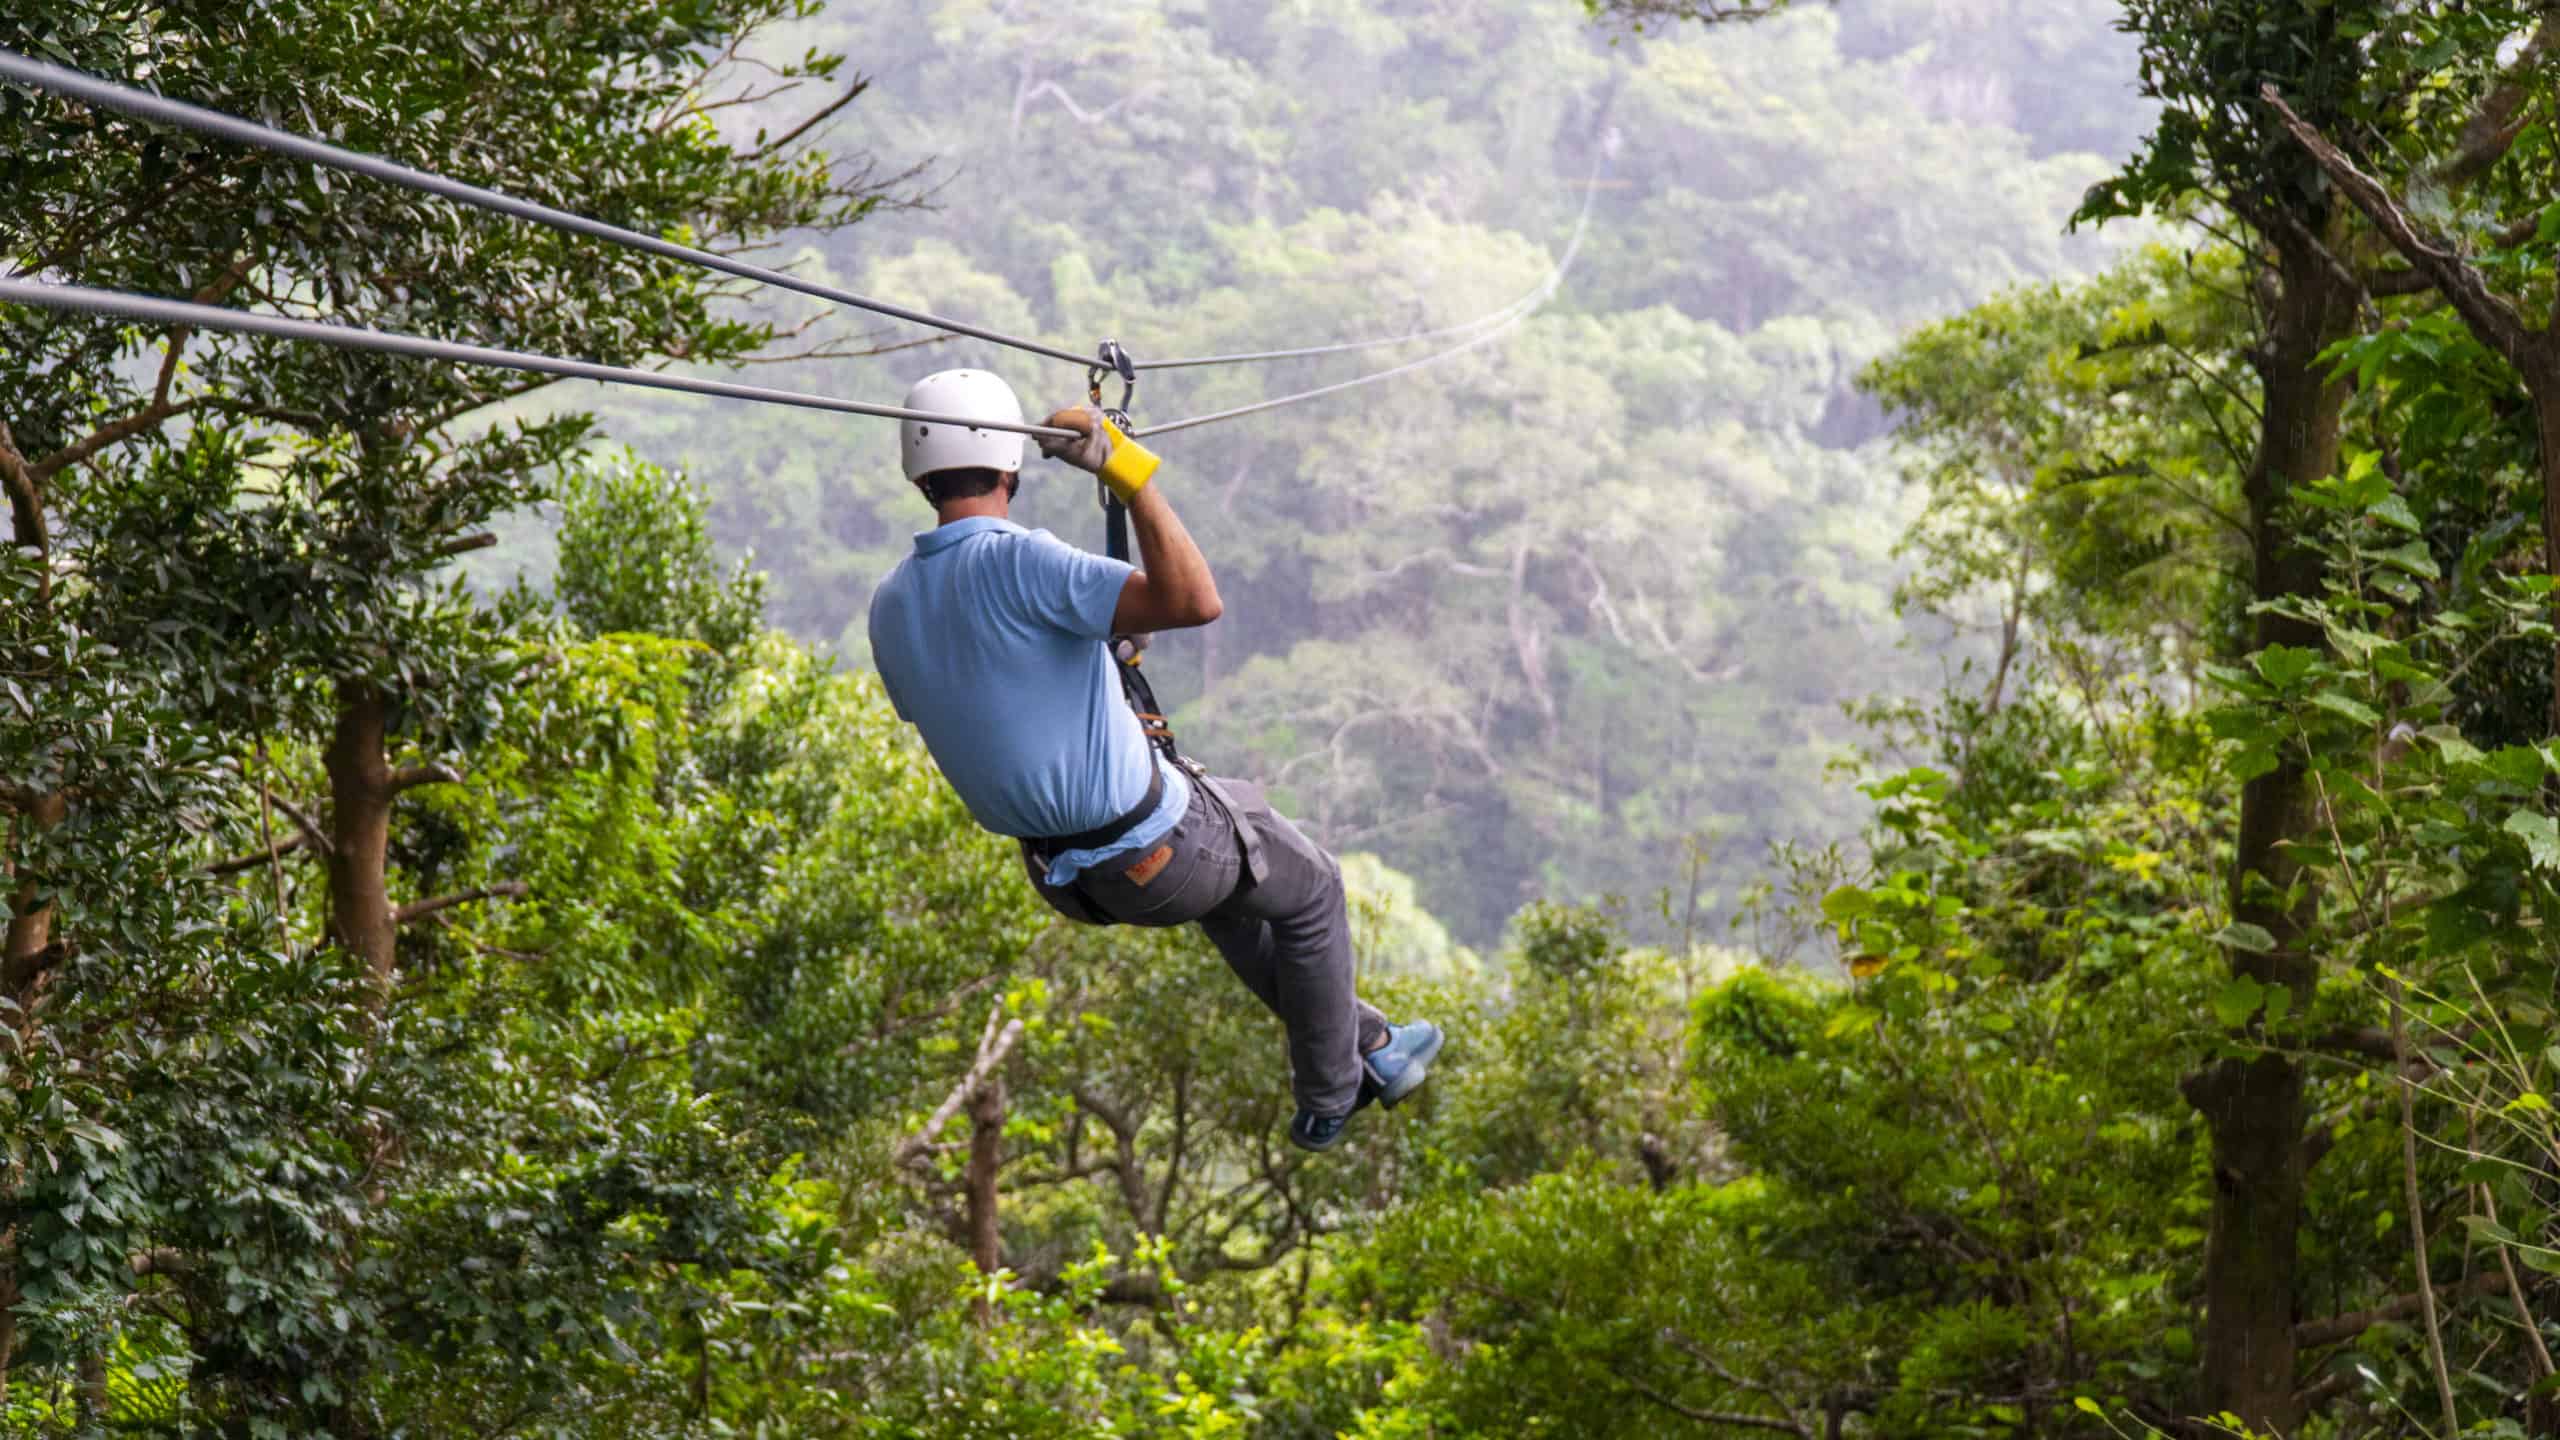 canopy tours in jaco